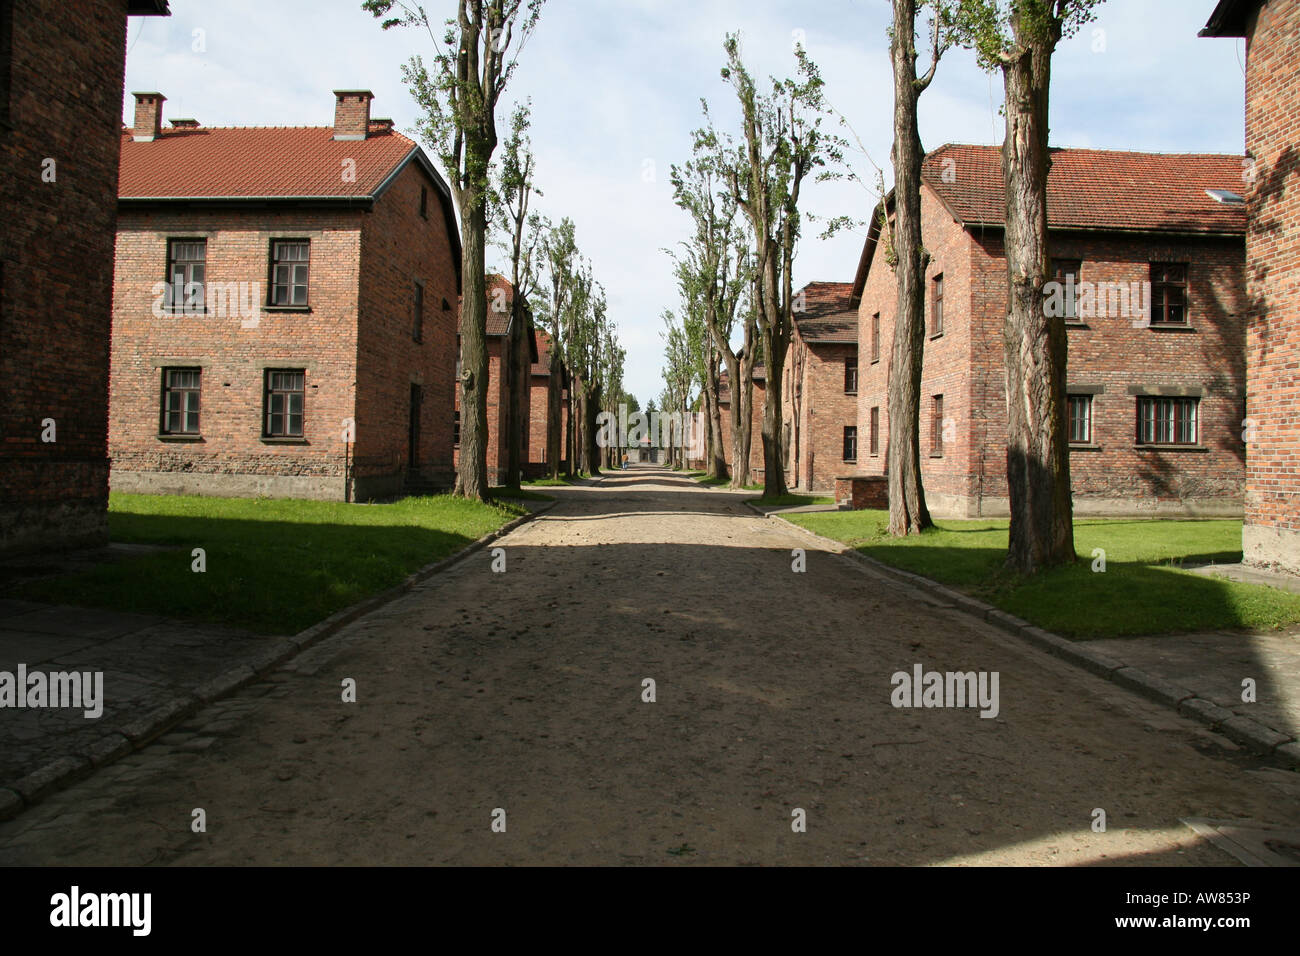 A view down one of the tree lined avenues in the former Nazi concentration camp at Auschwitz, Oswiecim, Poland. Stock Photo